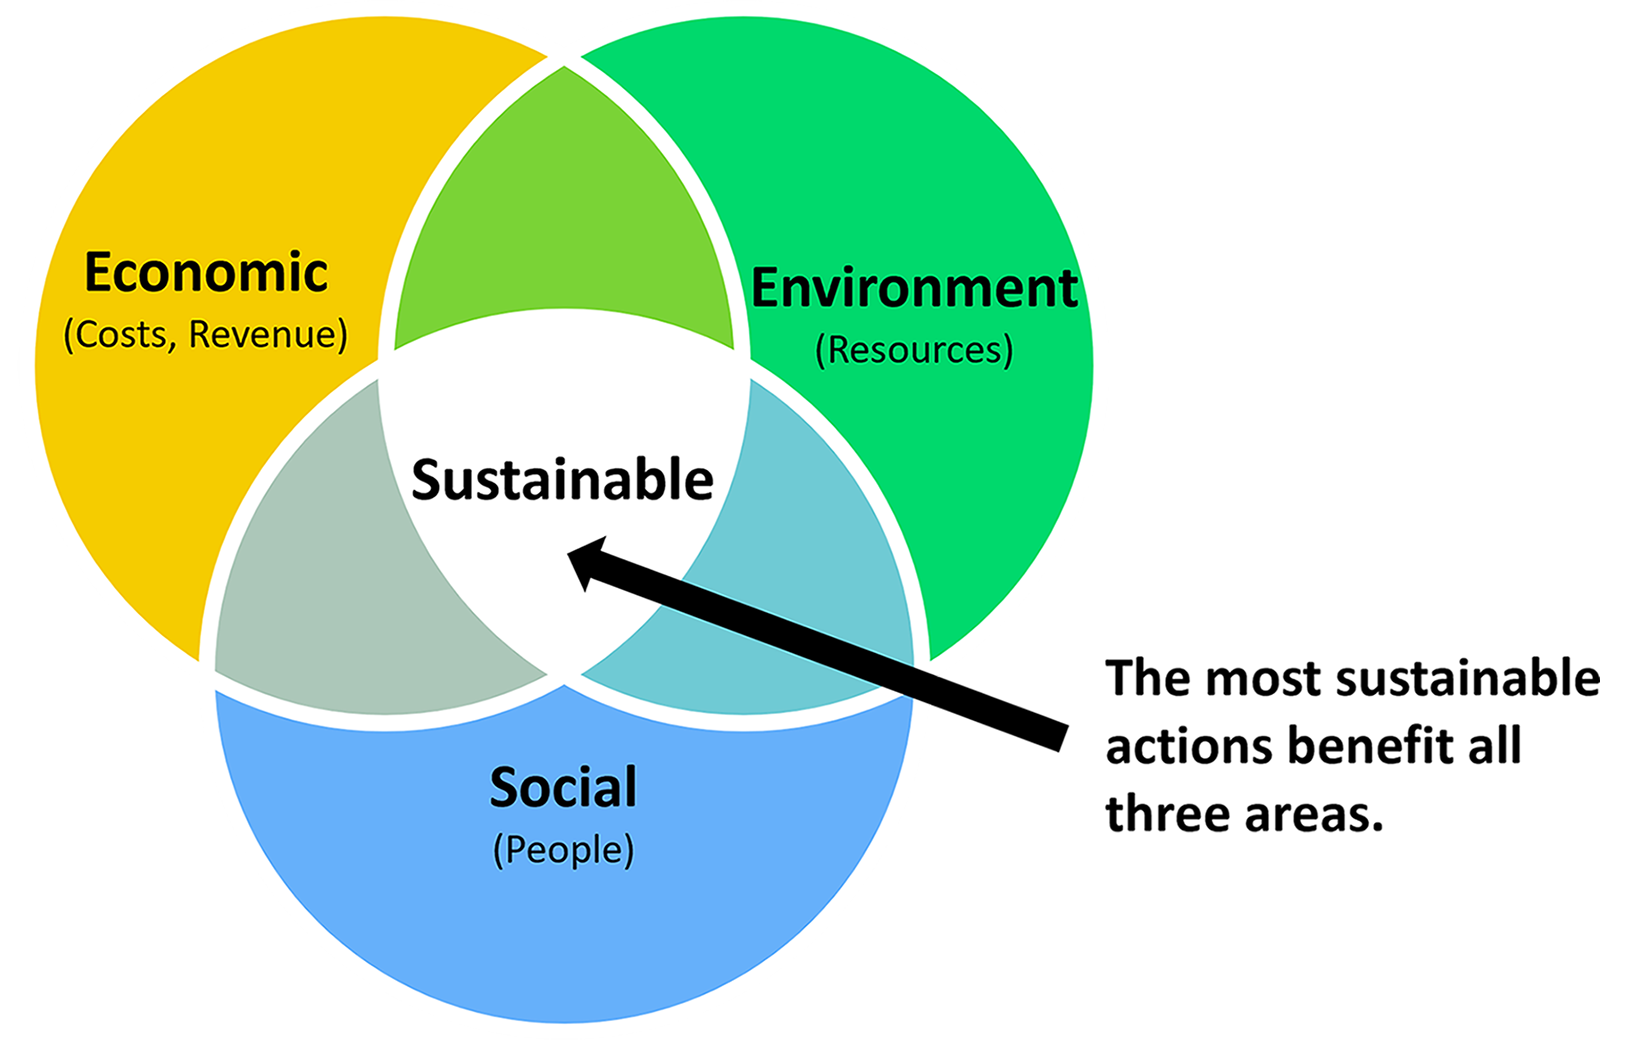 Diagram: Economic, Environment, Social, with Sustainable in the middle. The most sustainable actions benefit all three areas.